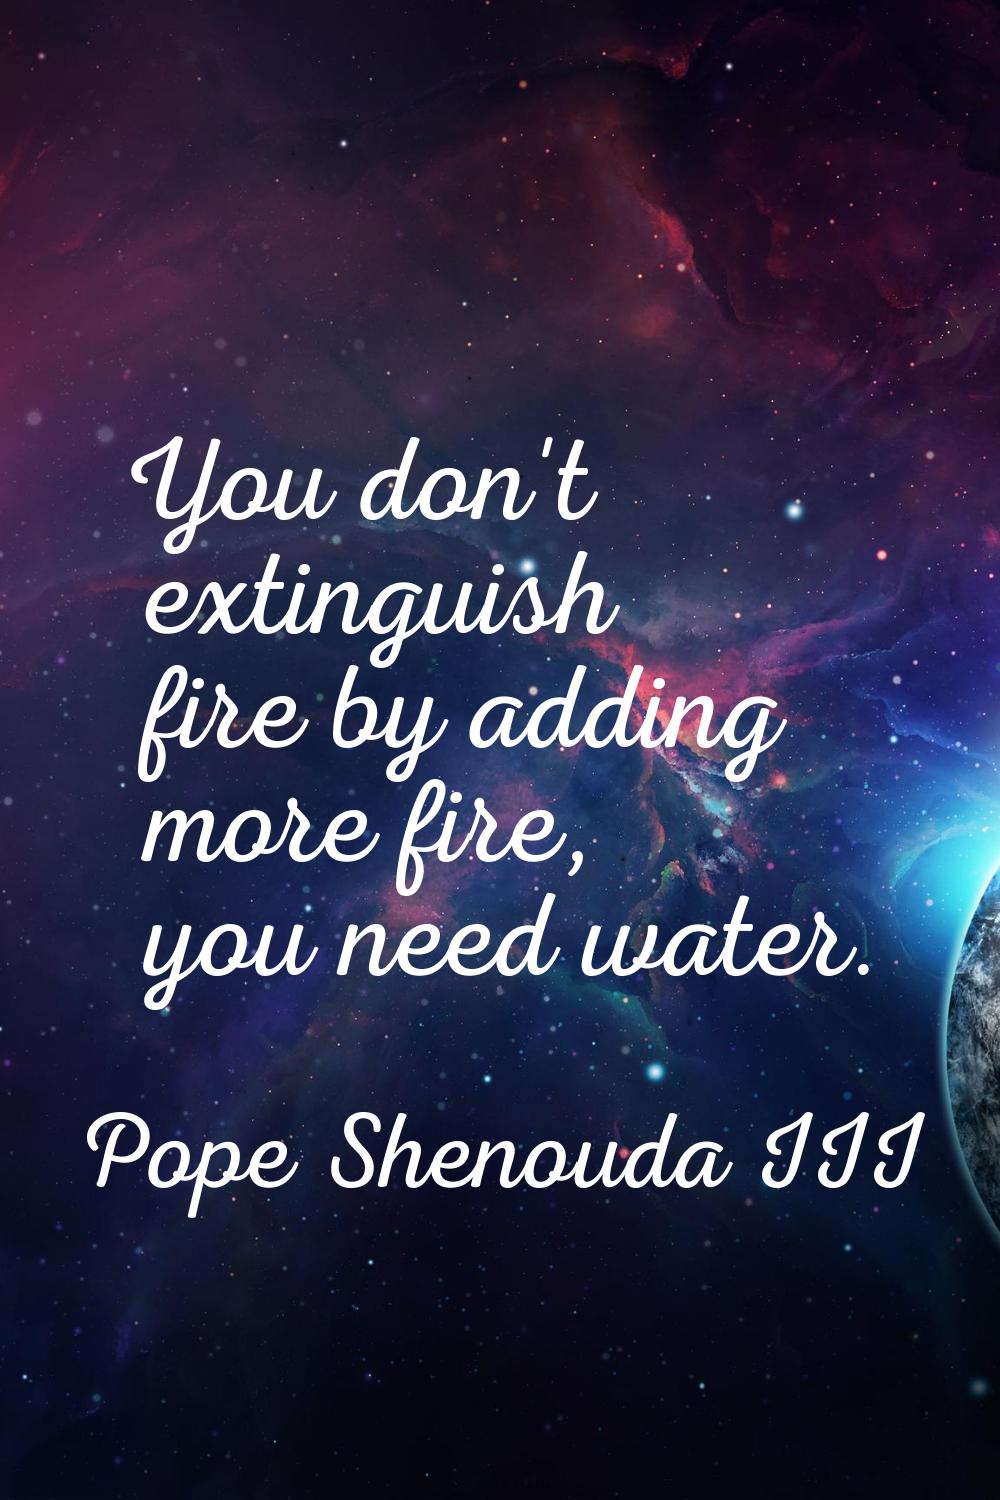 You don't extinguish fire by adding more fire, you need water.